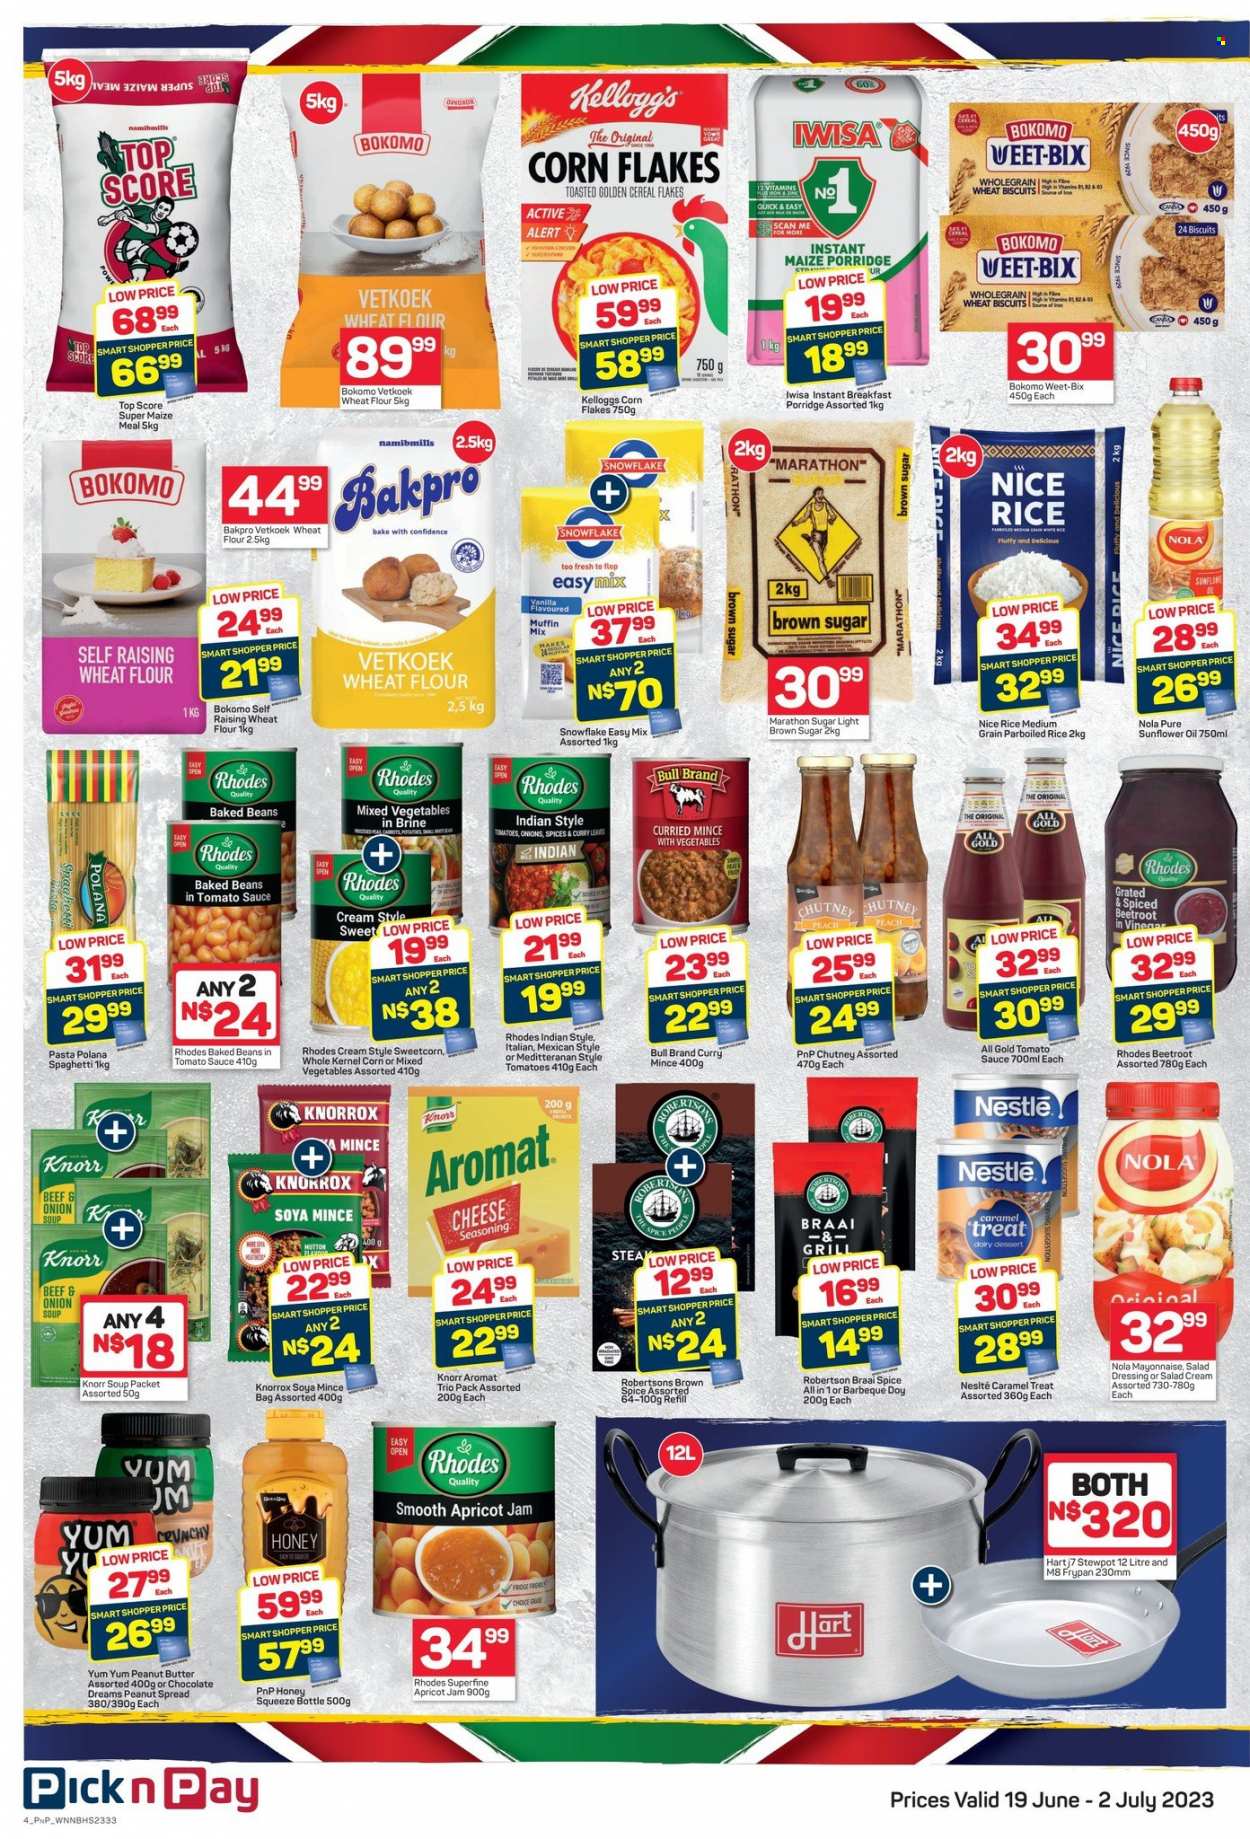 Pick n Pay catalogue  - 19/06/2023 - 02/07/2023 - Sales products - dessert, muffin mix, beans, mixed vegetables, spaghetti, onion soup, soup, pasta, Knorr, salad cream, Nestlé, chocolate, cereal bar, Kellogg's, biscuit, cane sugar, flour, wheat flour, maize meal, soya mince, Knorrox, baked beans, caramel treat, cereals, corn flakes, Weet-Bix, porridge, rice, parboiled rice, spice, caramel, salad dressing, dressing, chutney, sunflower oil, vinegar, oil, apricot jam, honey, fruit jam, peanut butter, steak. Page 4.